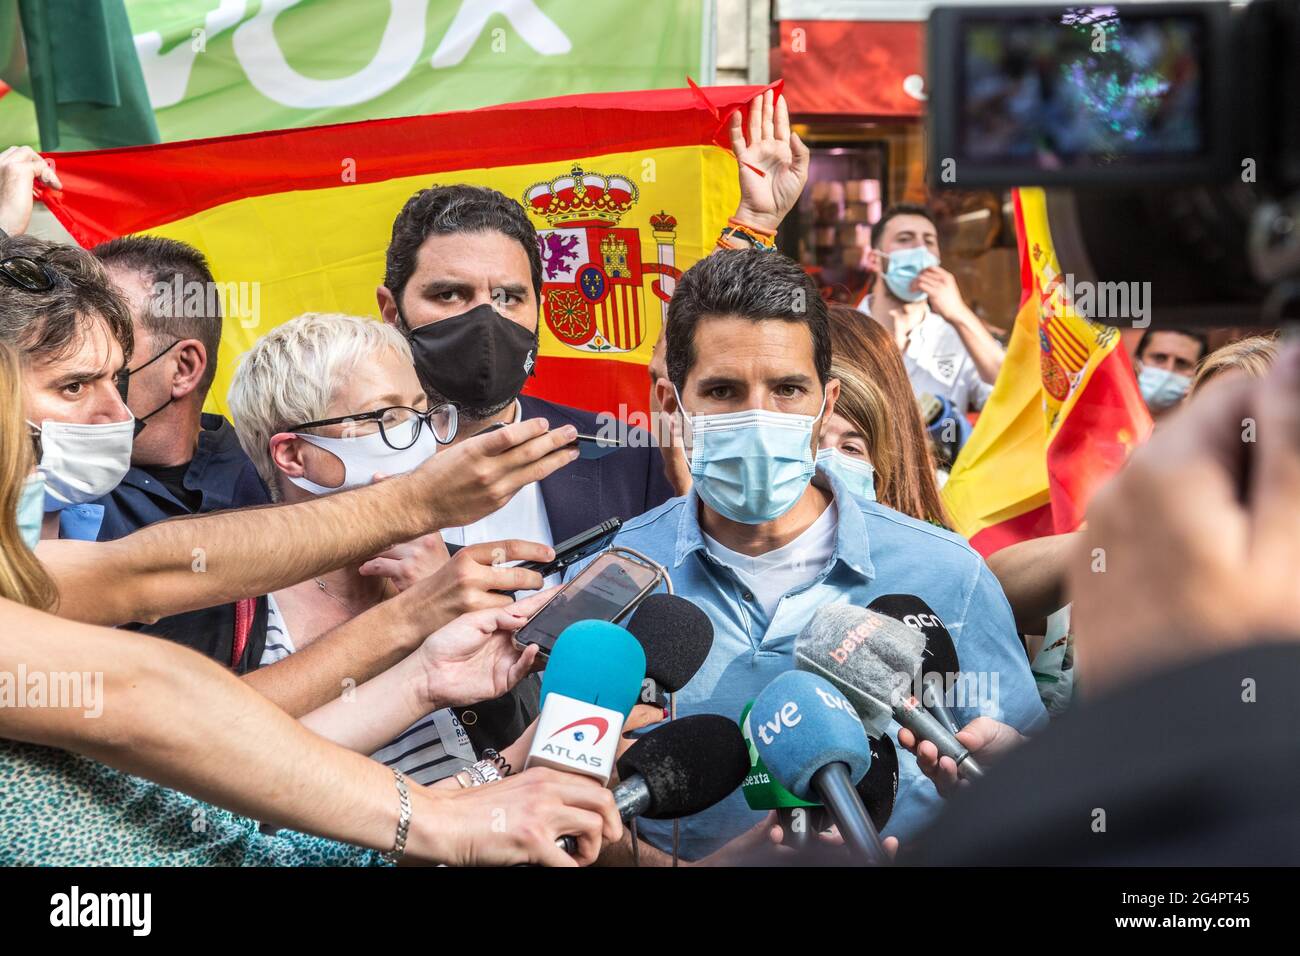 Barcelona, Spain. 22nd June, 2021. Nacho Martin Blanco, Deputy in the Parliament of Catalonia speaks to press during the demonstration.The Spanish far-right party, Vox, together with the political party, Ciudadanos, have called a demonstration in Barcelona's Artos Square, a regular place for far-right rallies, against the President of the Spanish Government, Pedro Sanchez, for the decision to pardon the prisoners Catalan independence politicians. (Photo by Thiago Prudencio/SOPA Images/Sipa USA) Credit: Sipa USA/Alamy Live News Stock Photo